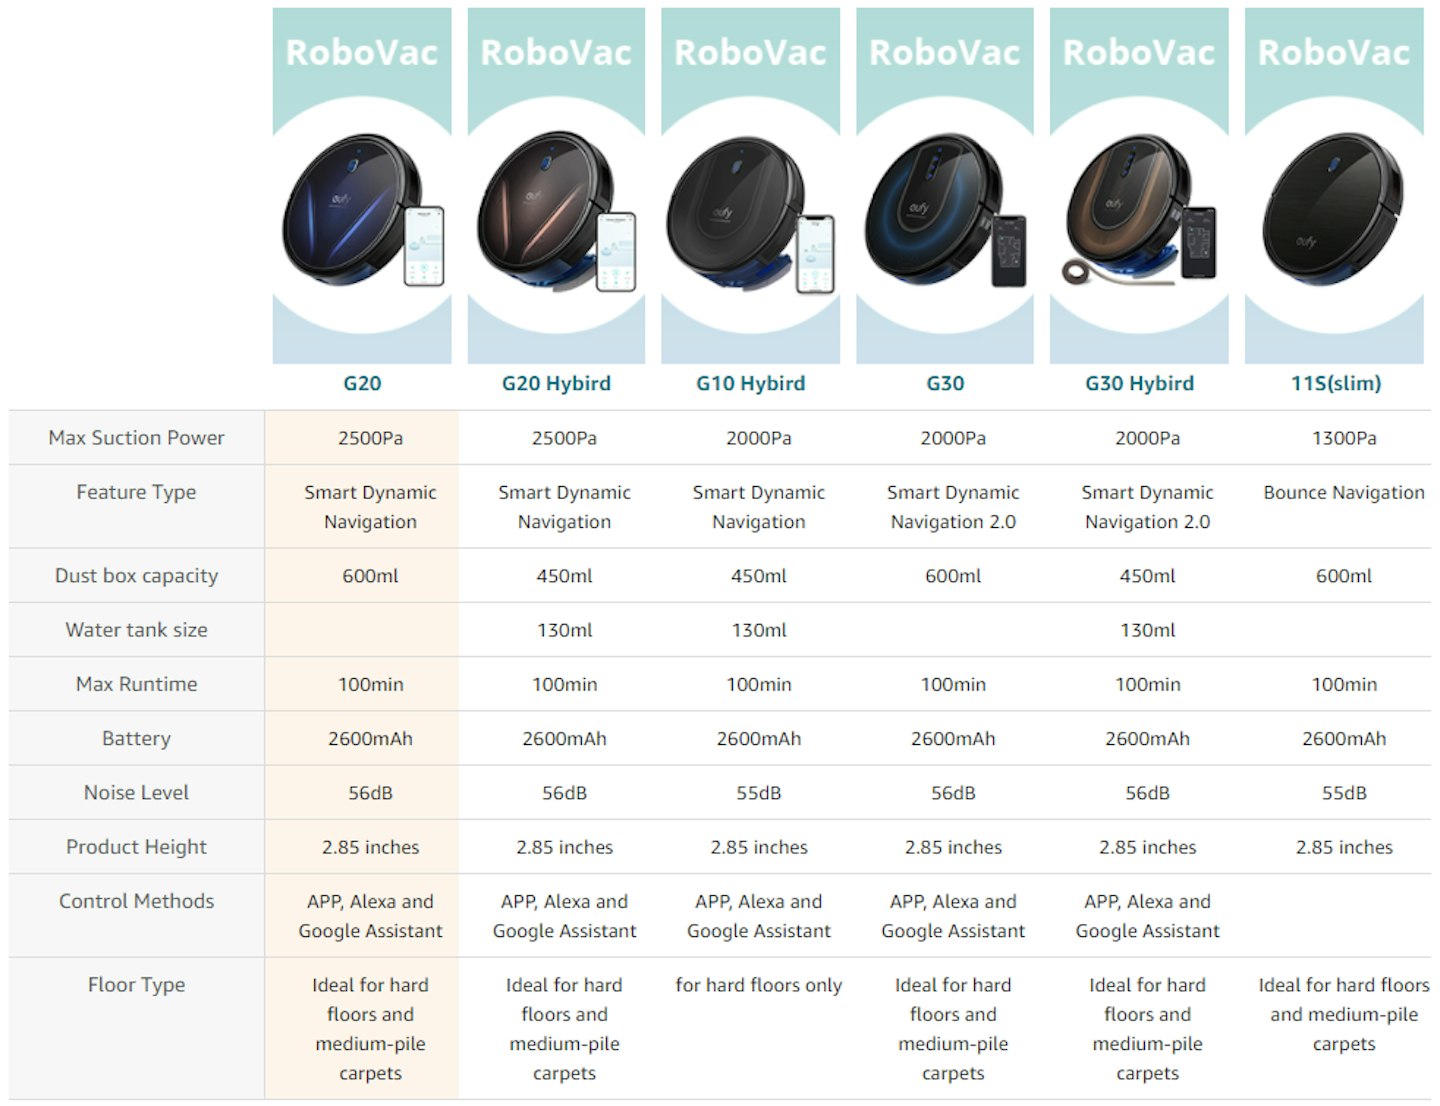 image of a comparison table displaying the features of the RoboVac models.